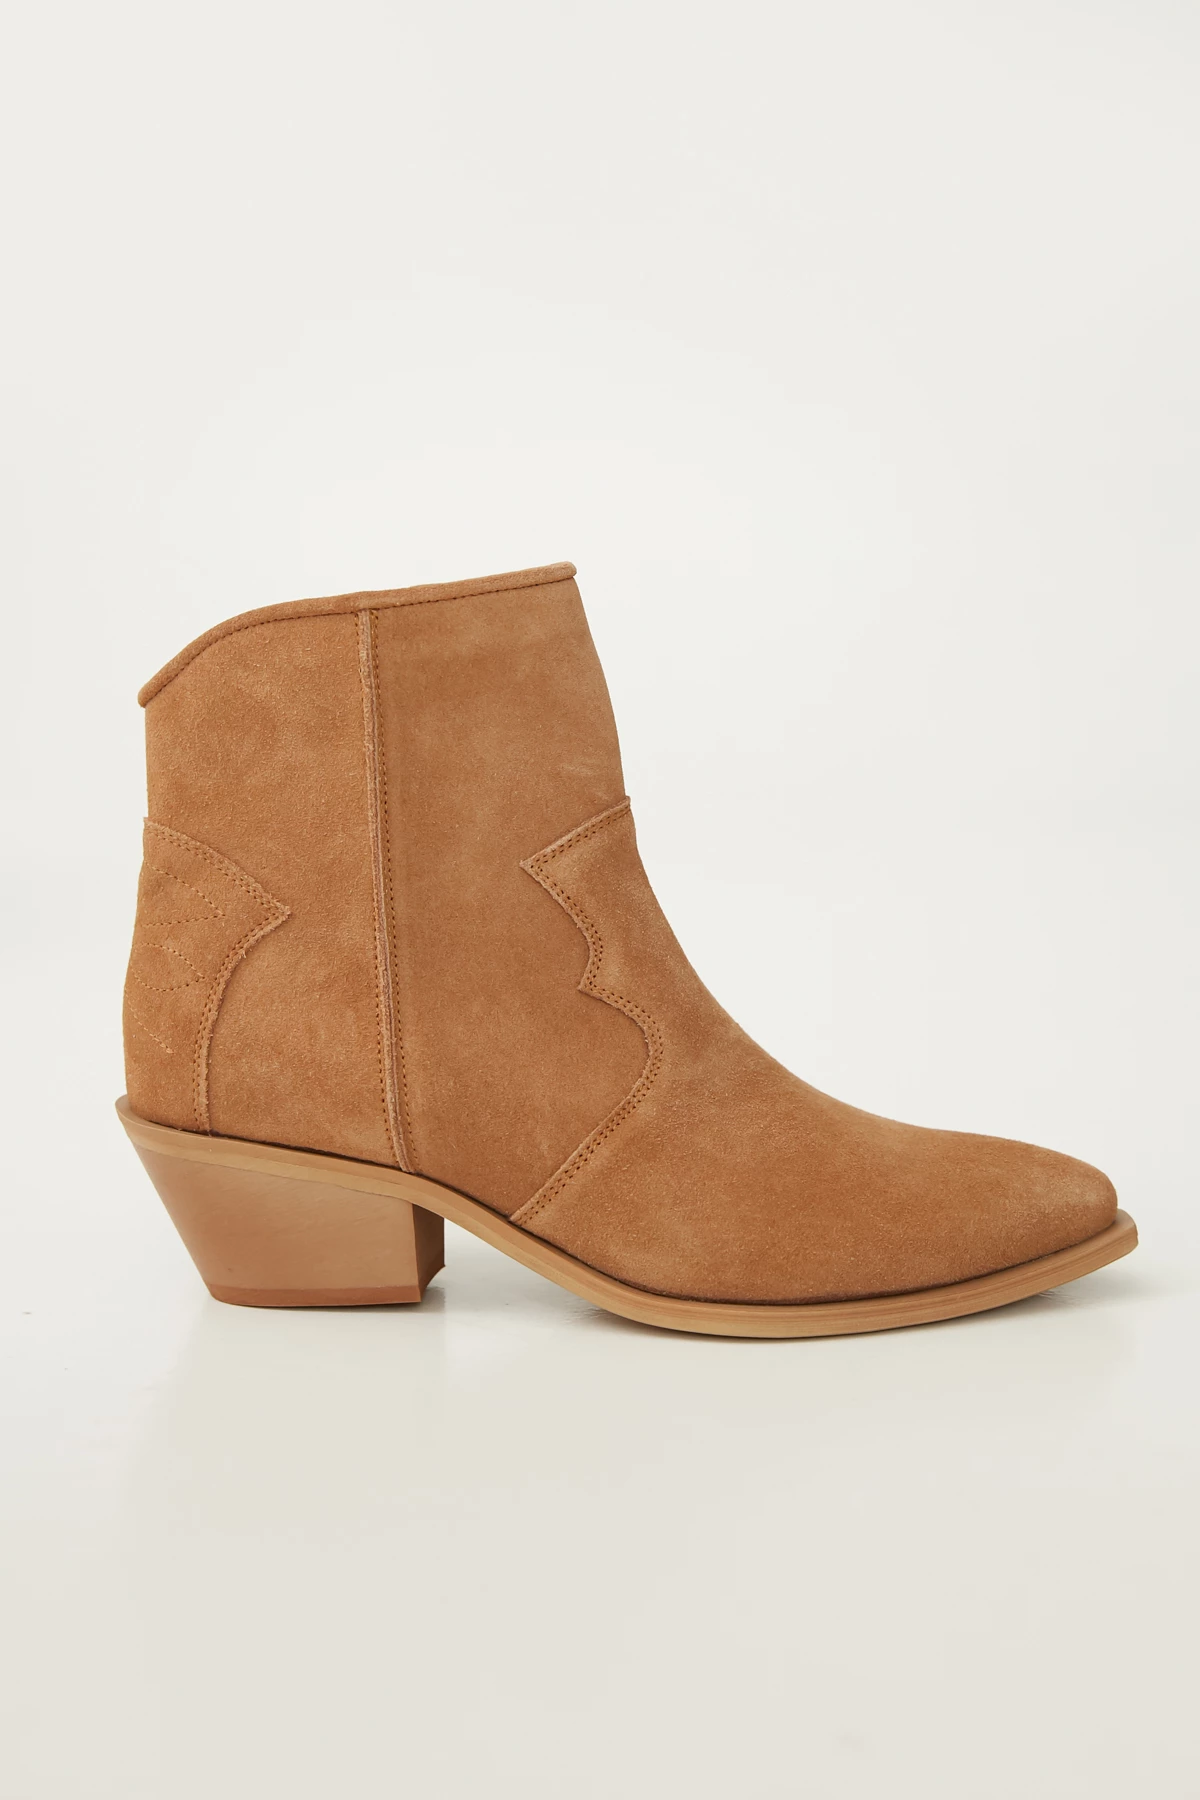 Suede camel сowboy boots, photo 1